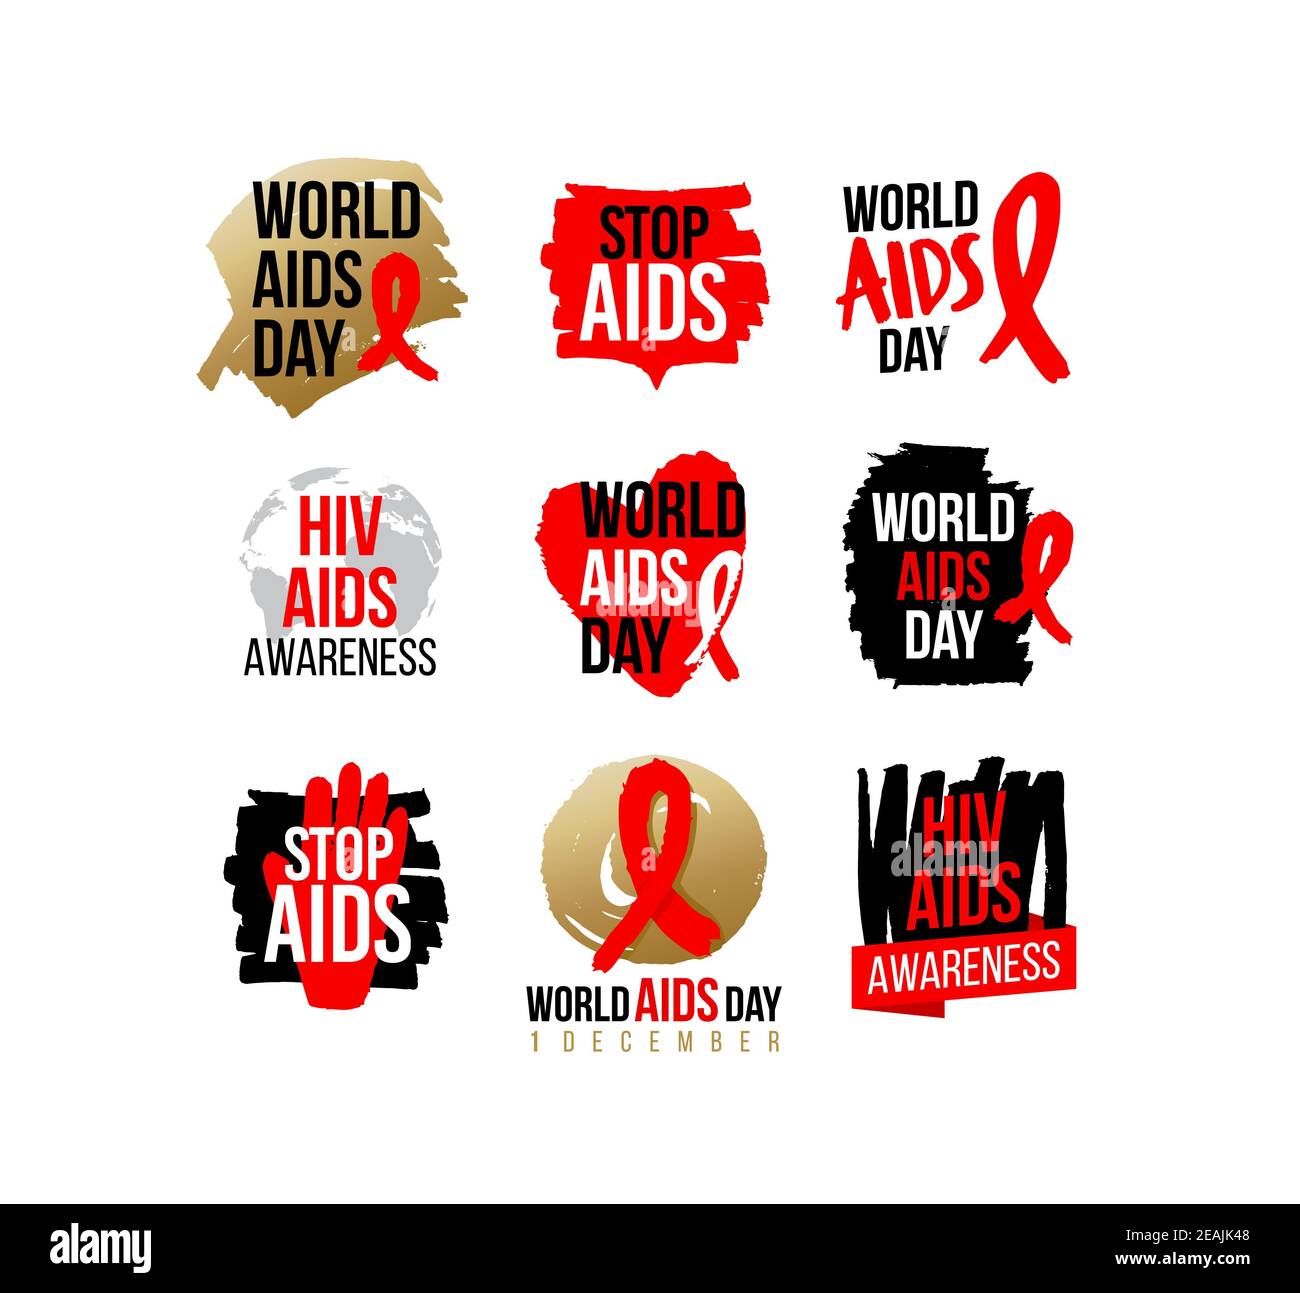 Aids and Hiv Awareness Red Ribbon. WORLD AIDS DAY CAMPAIGNS icon, badges, sticker, label, tag design for advertising campaign. Stop Aids. 1 December Stock Photo